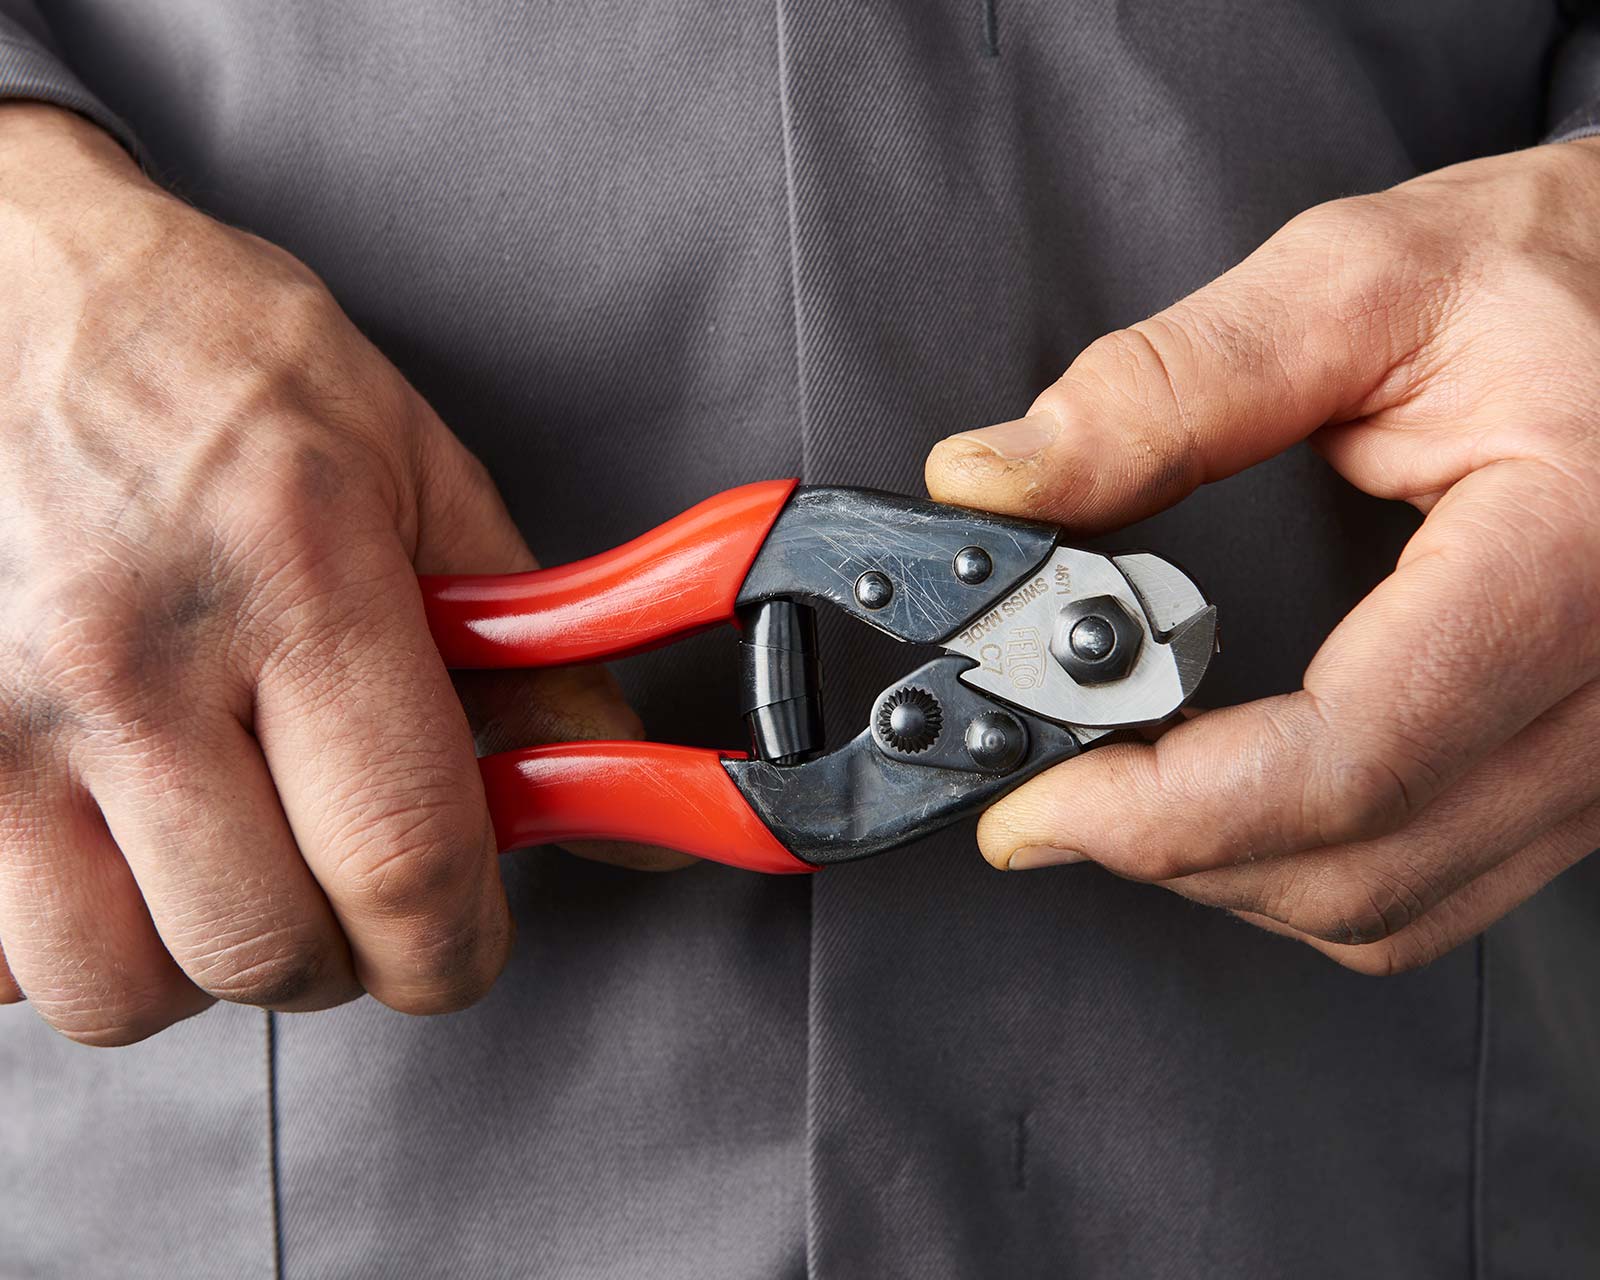 Cable Cutters C7 - part of the cable cutting range by Felco